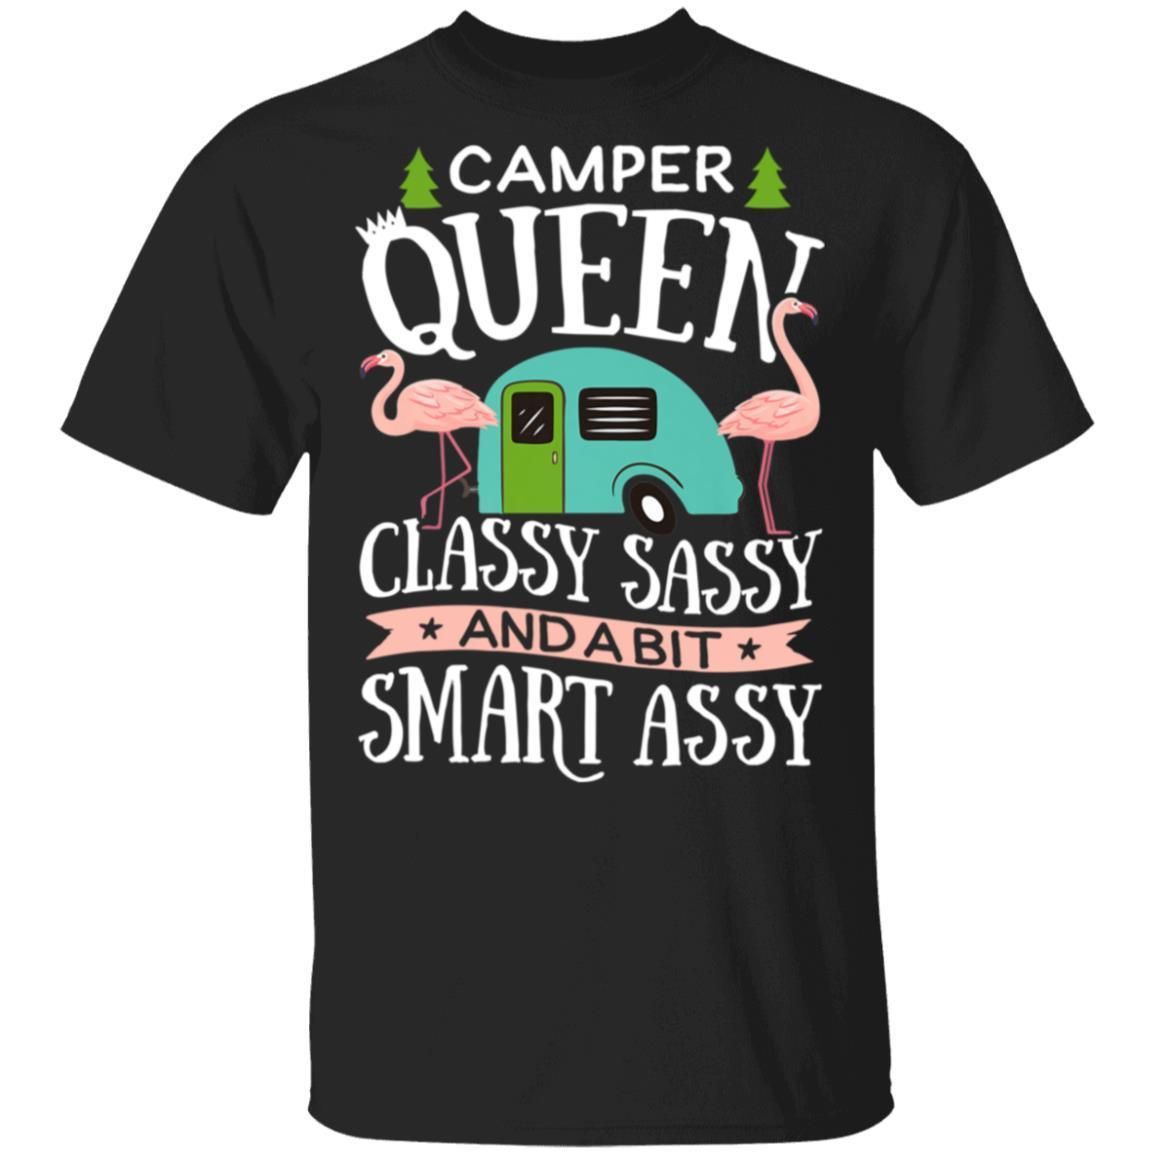 Camper Queen Classy Sassy and a Bit Smart Assy Camping shirts